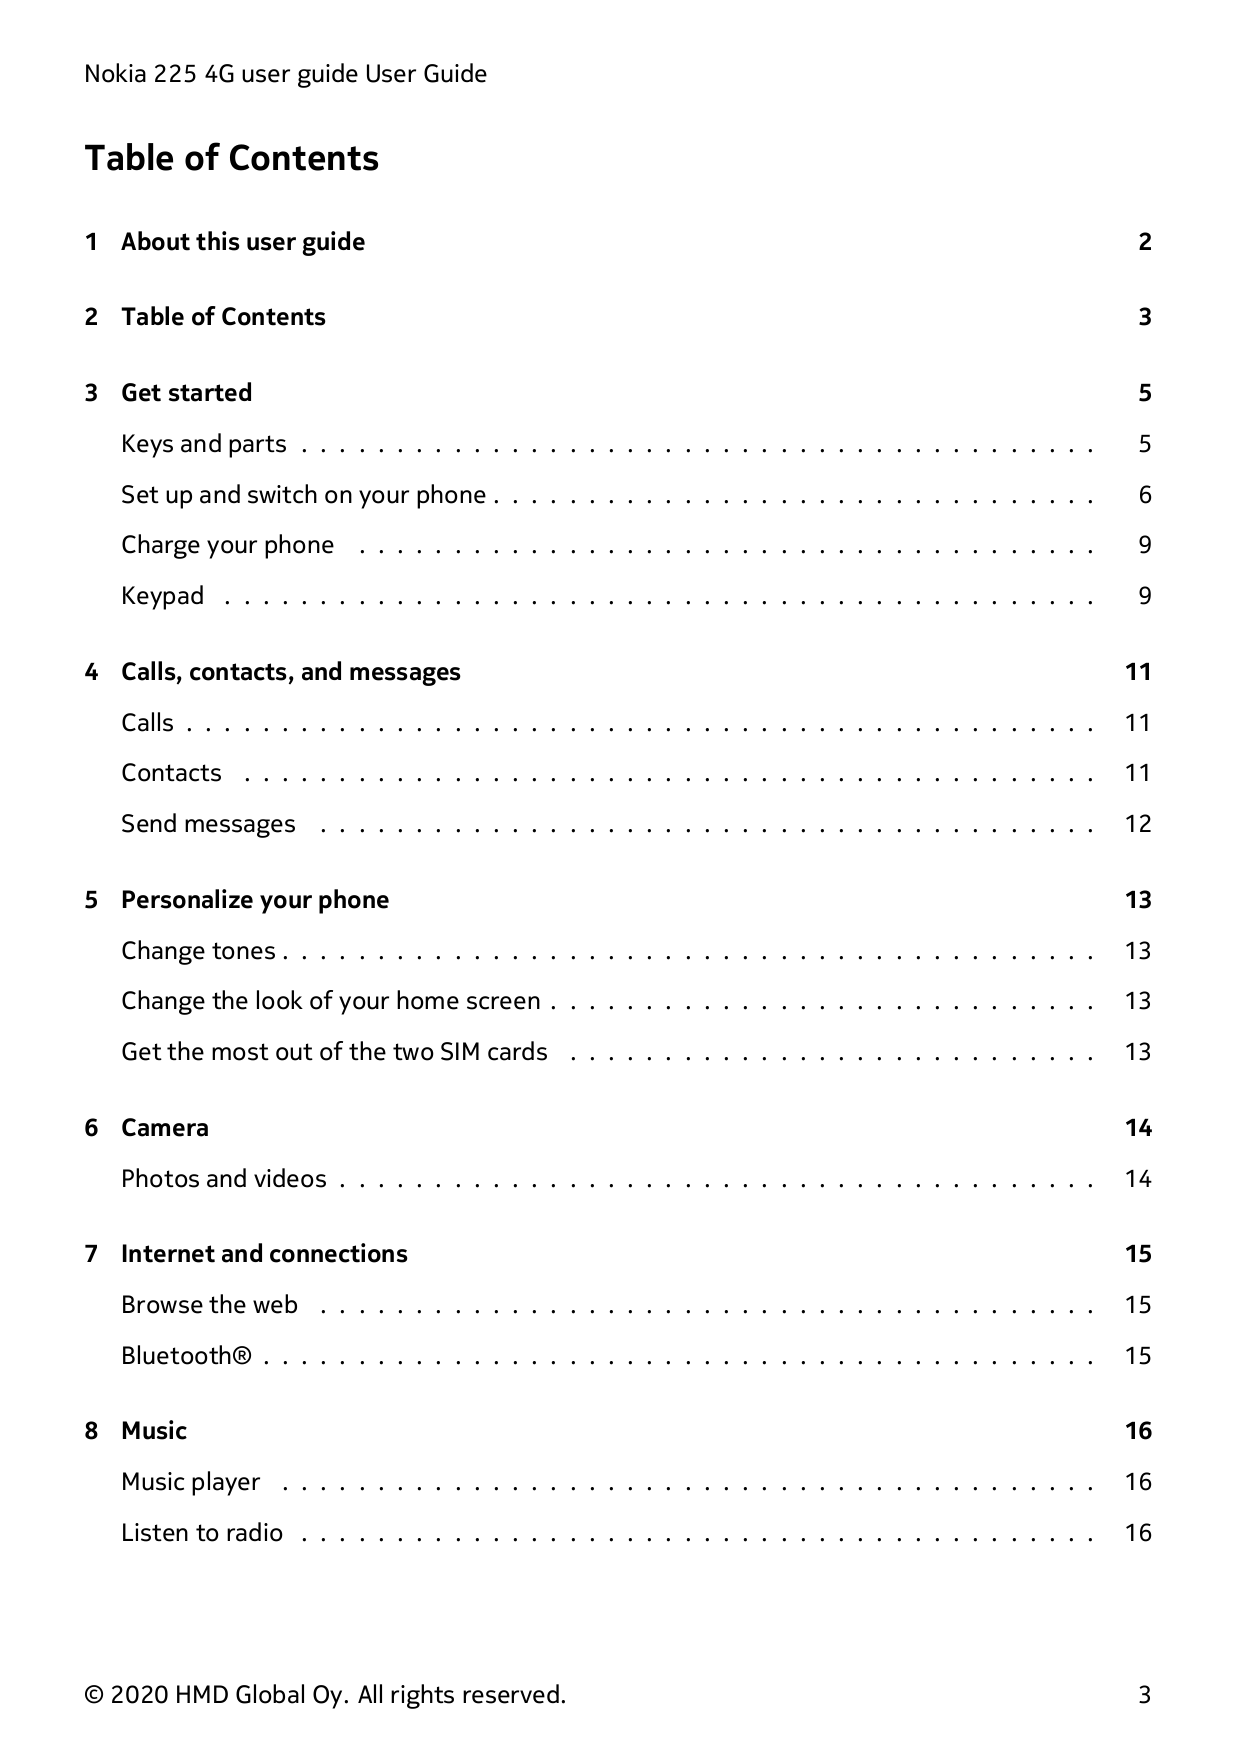 Nokia 225 4G user guide User GuideTable of Contents1 About this user guide22 Table of Contents33 Get started5Keys and parts . . 